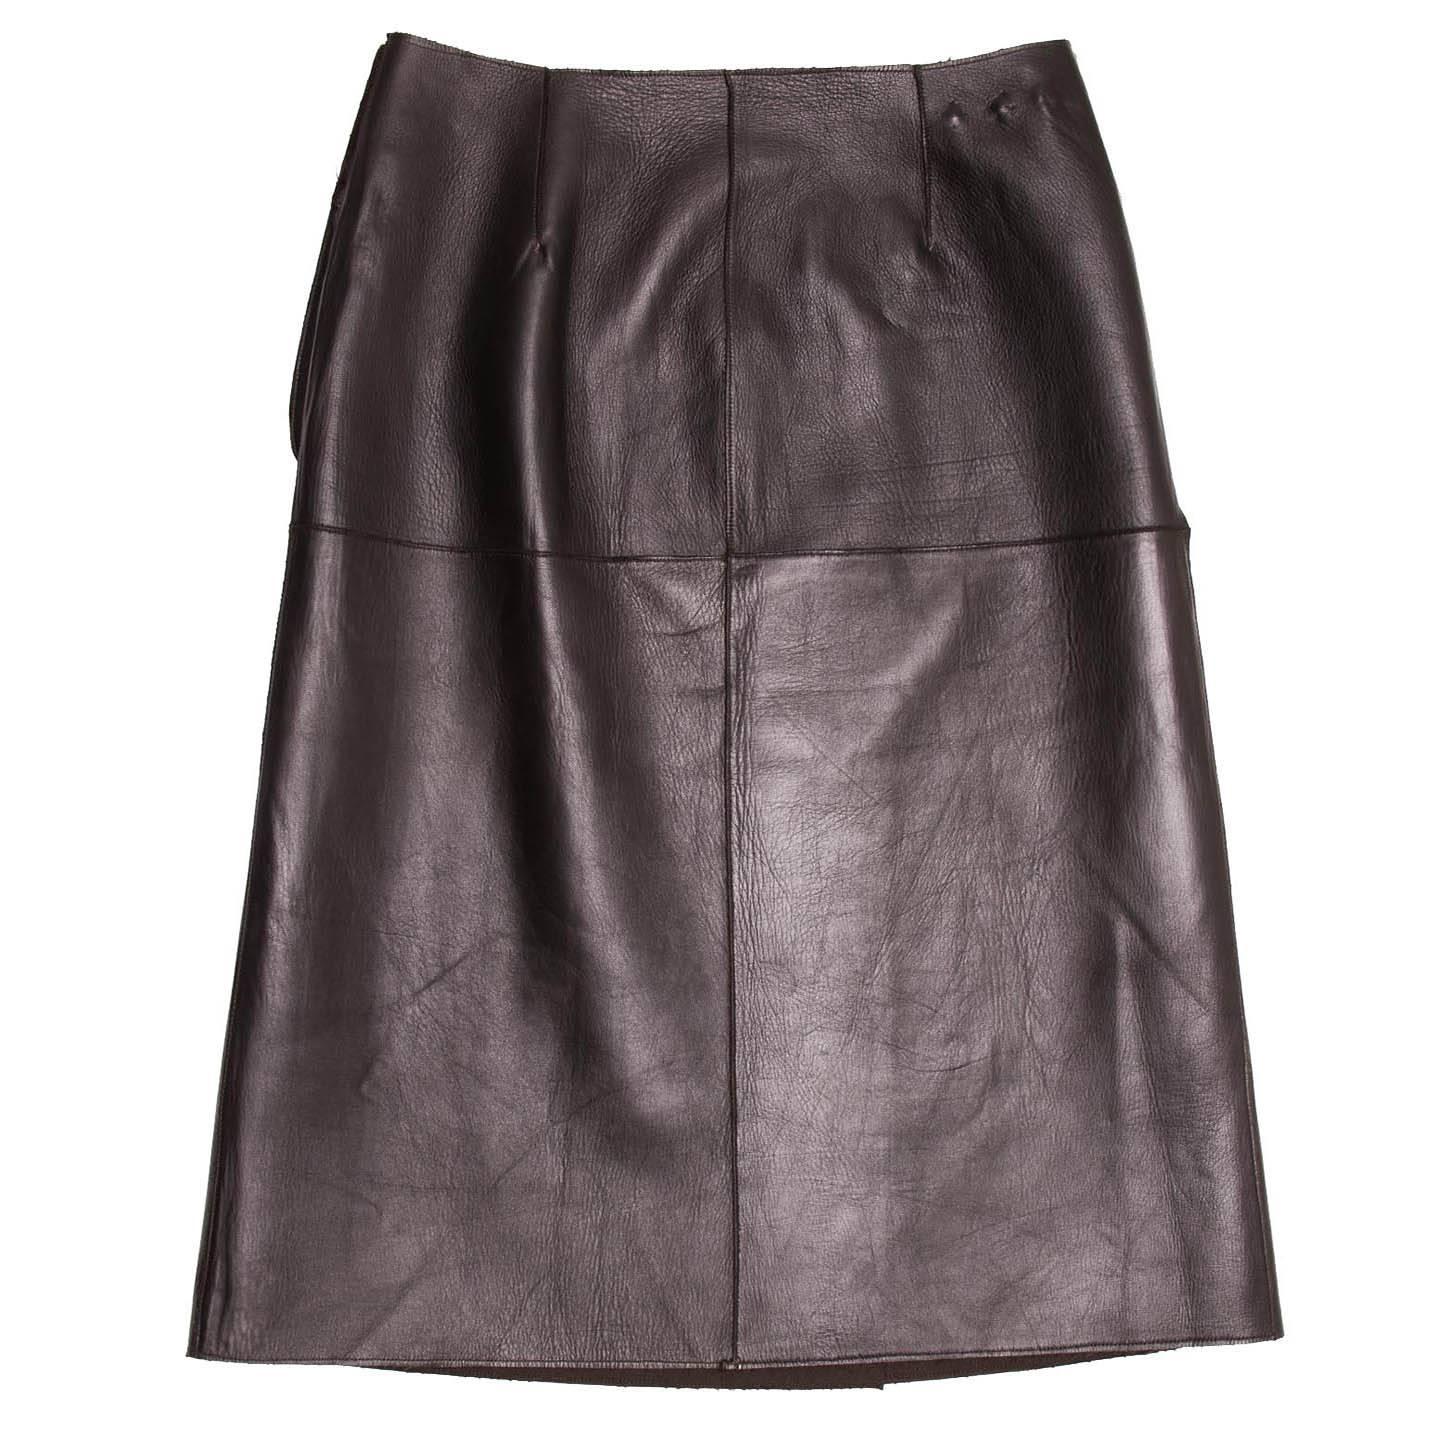 Prada Brown Reversible Leather & Camel Skirt In Excellent Condition For Sale In Brooklyn, NY